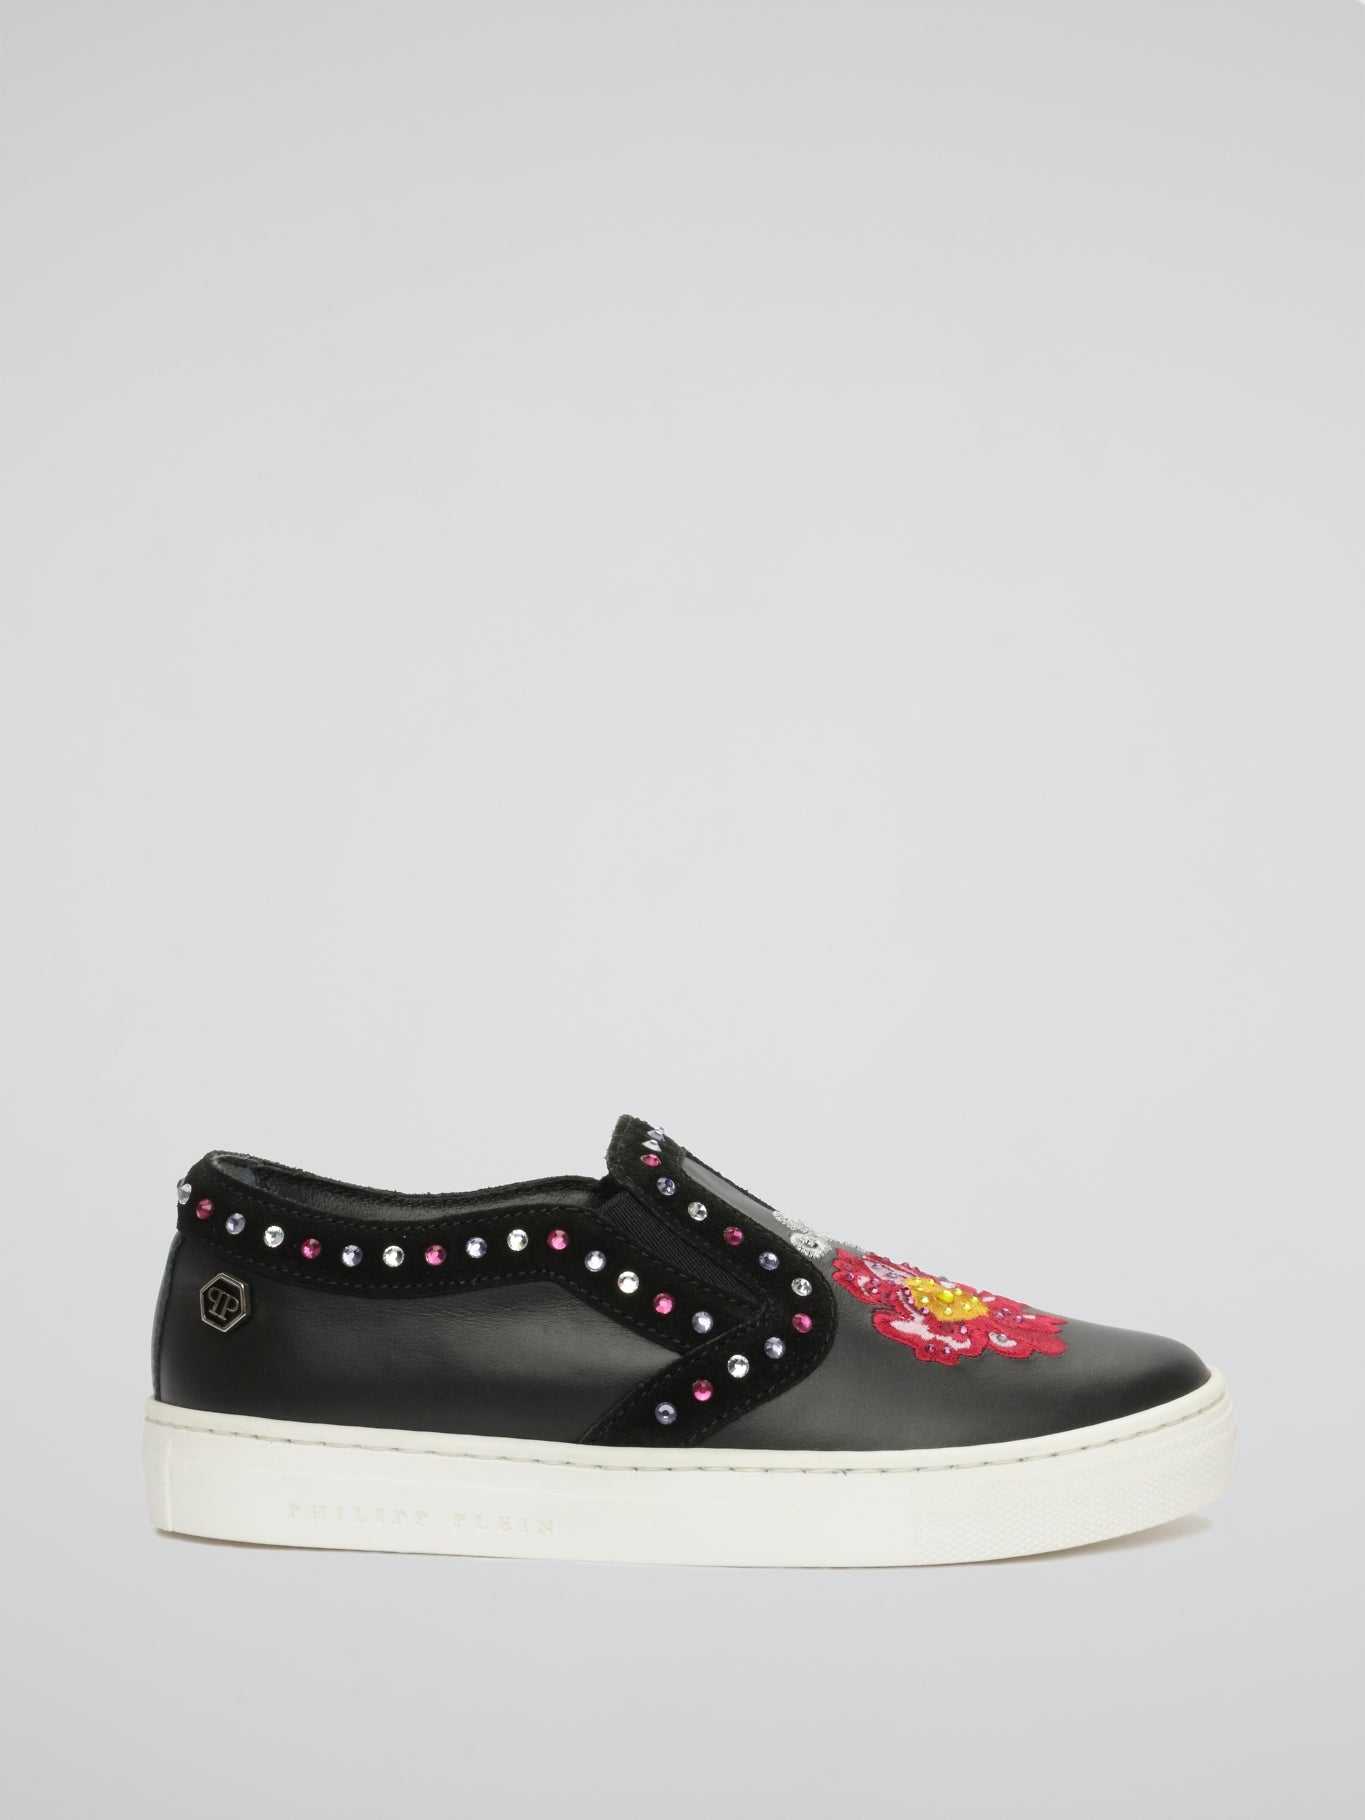 Black Patched Slip-On Sneakers (Kids)